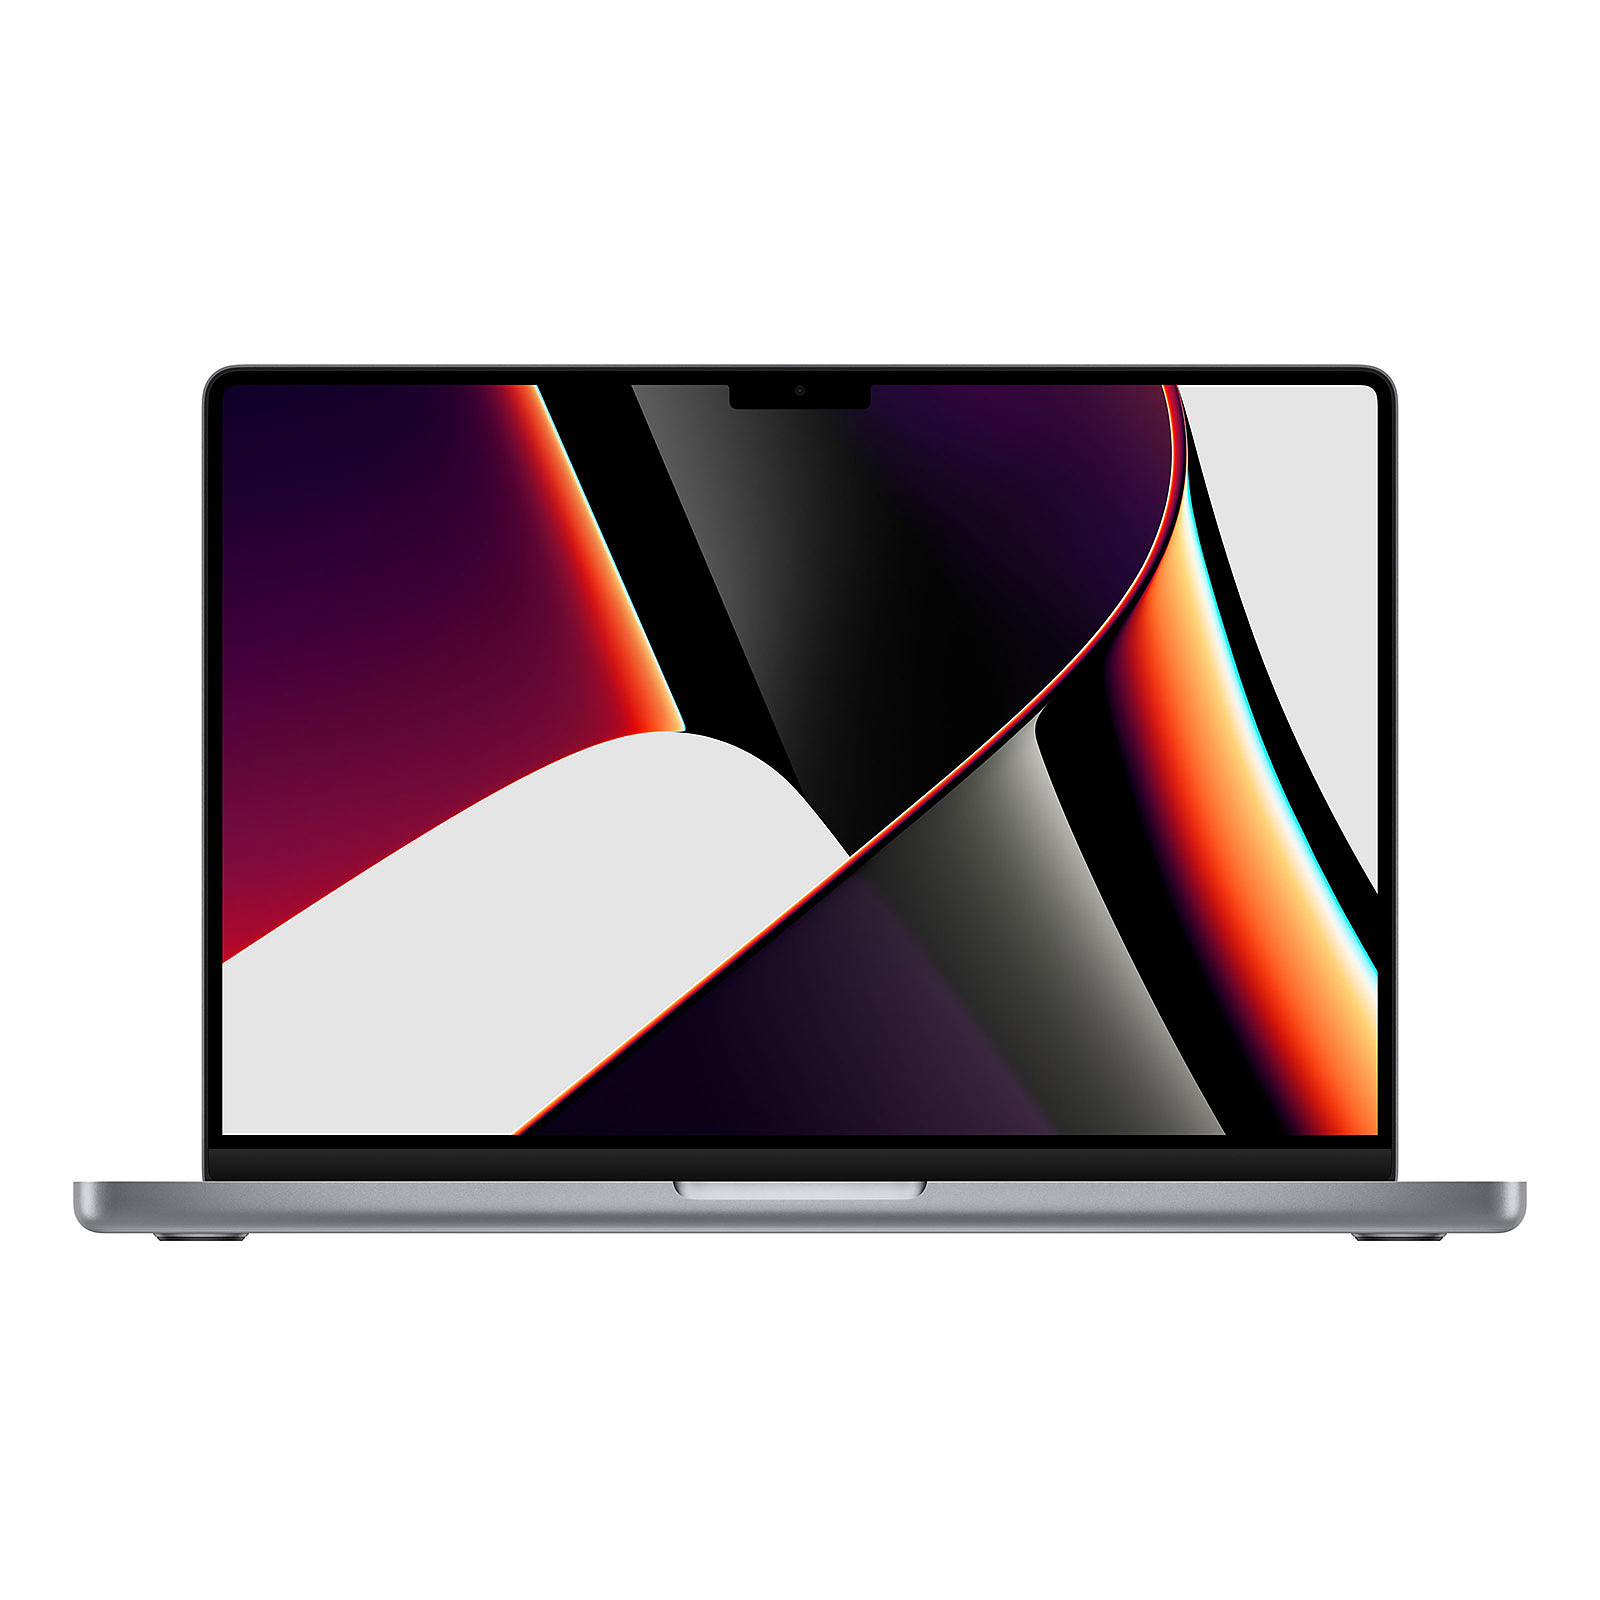 Apple MacBook Pro M1 Pro (2021) 14" Gris sideral 16Go/4To (MKGQ3FN/A-4TB) - MacBook Apple